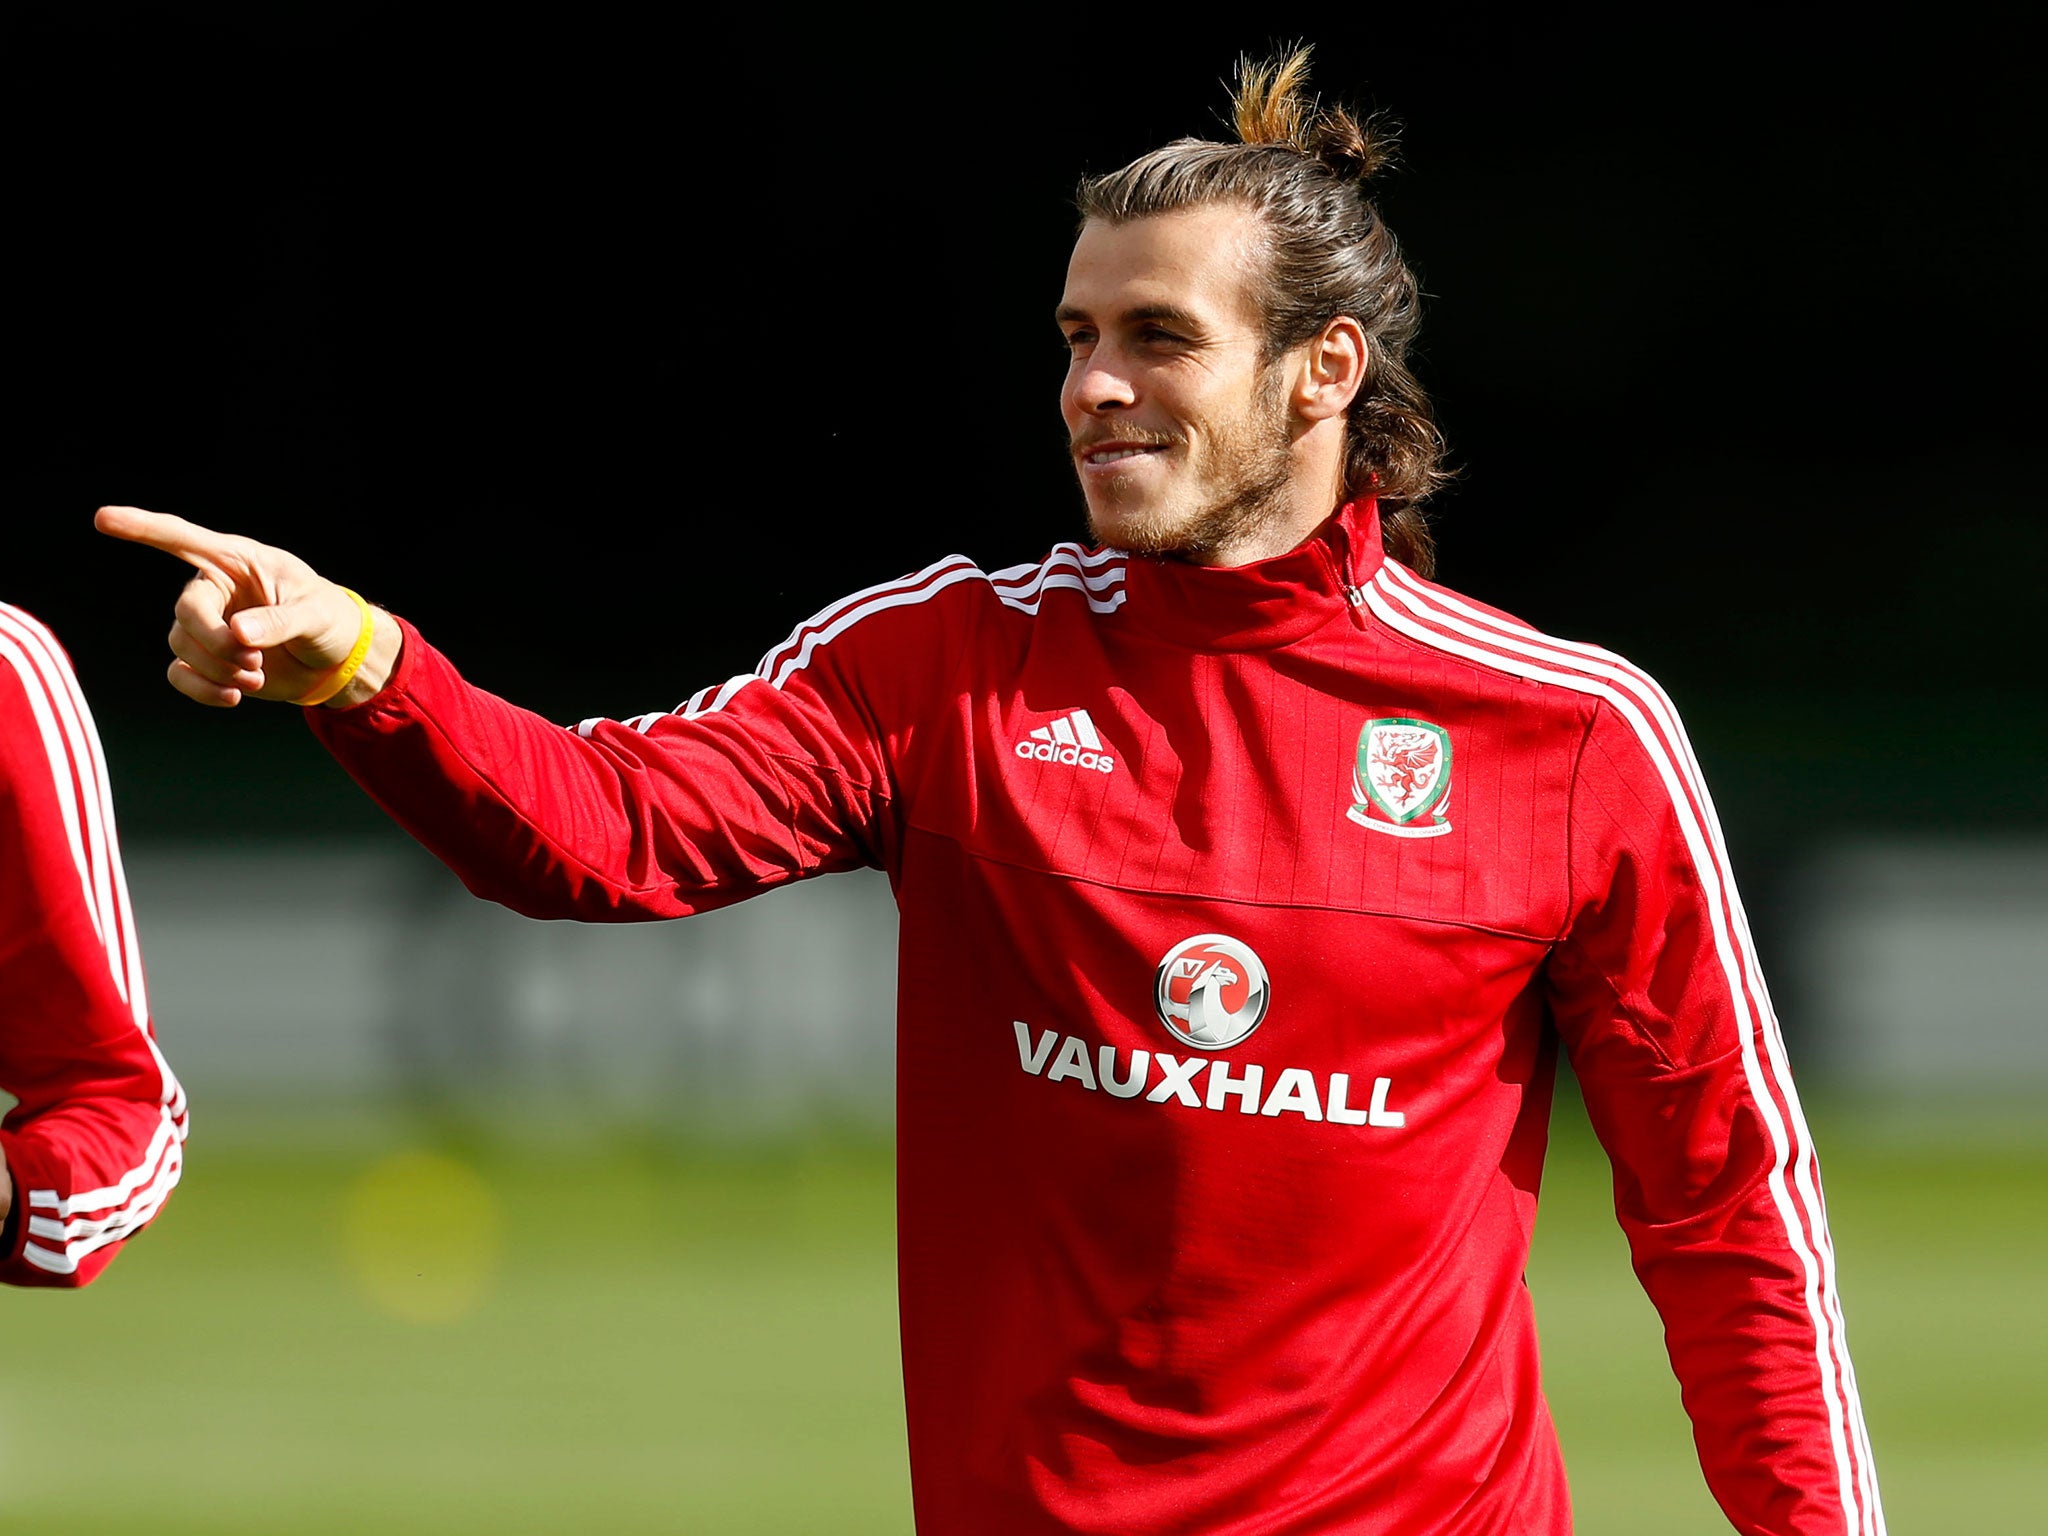 Gareth Bale has scored five goals in six games in Wales’ qualification campaign